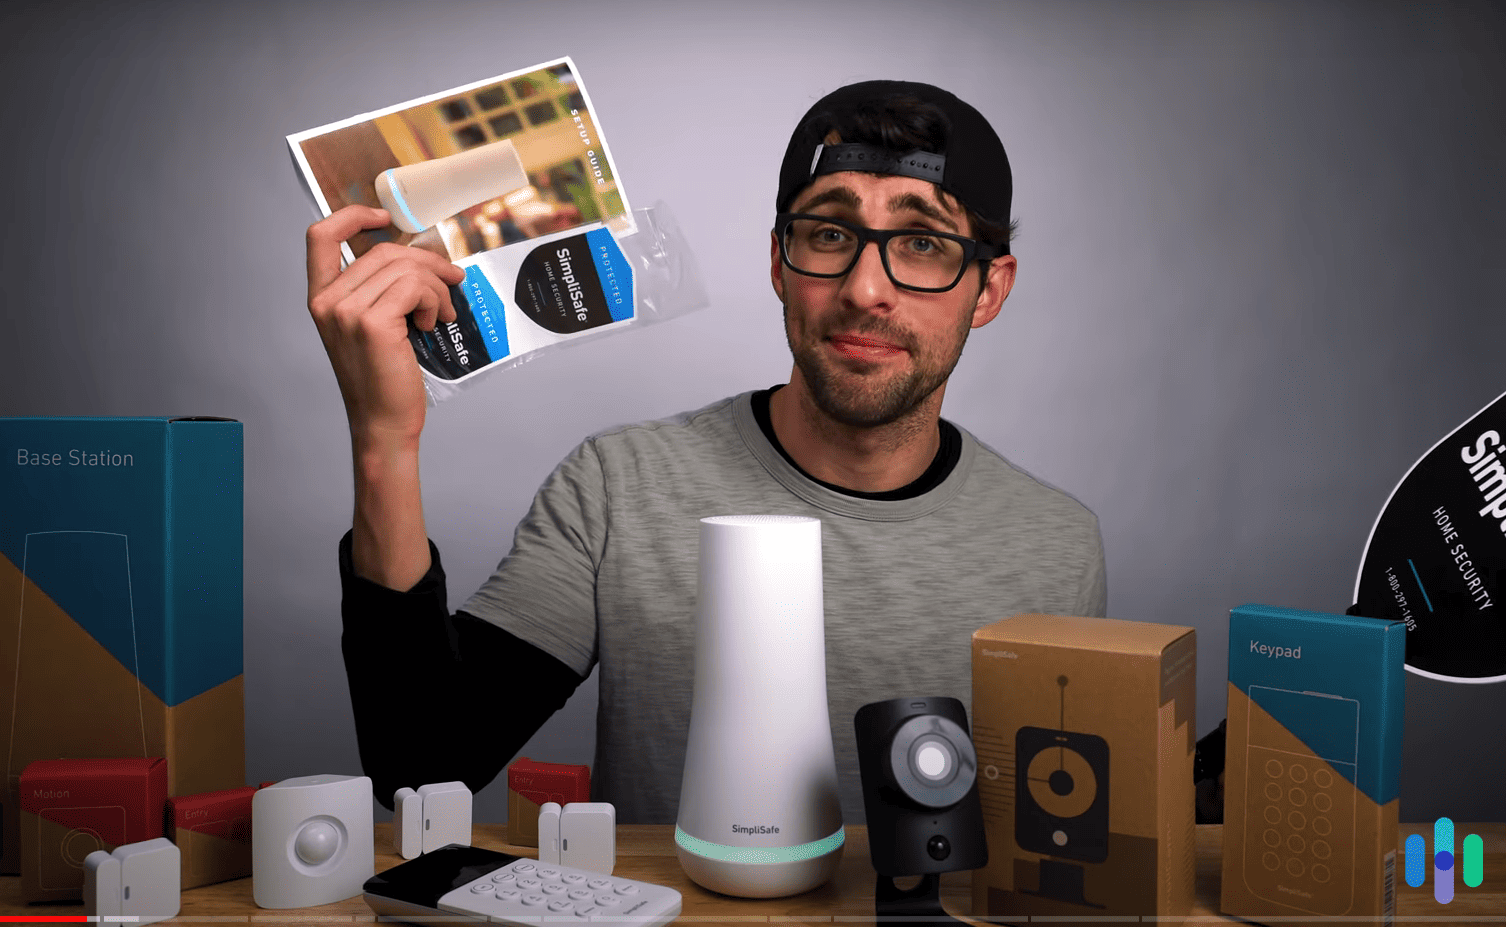 Corey and the SimpliSafe security system he tested.